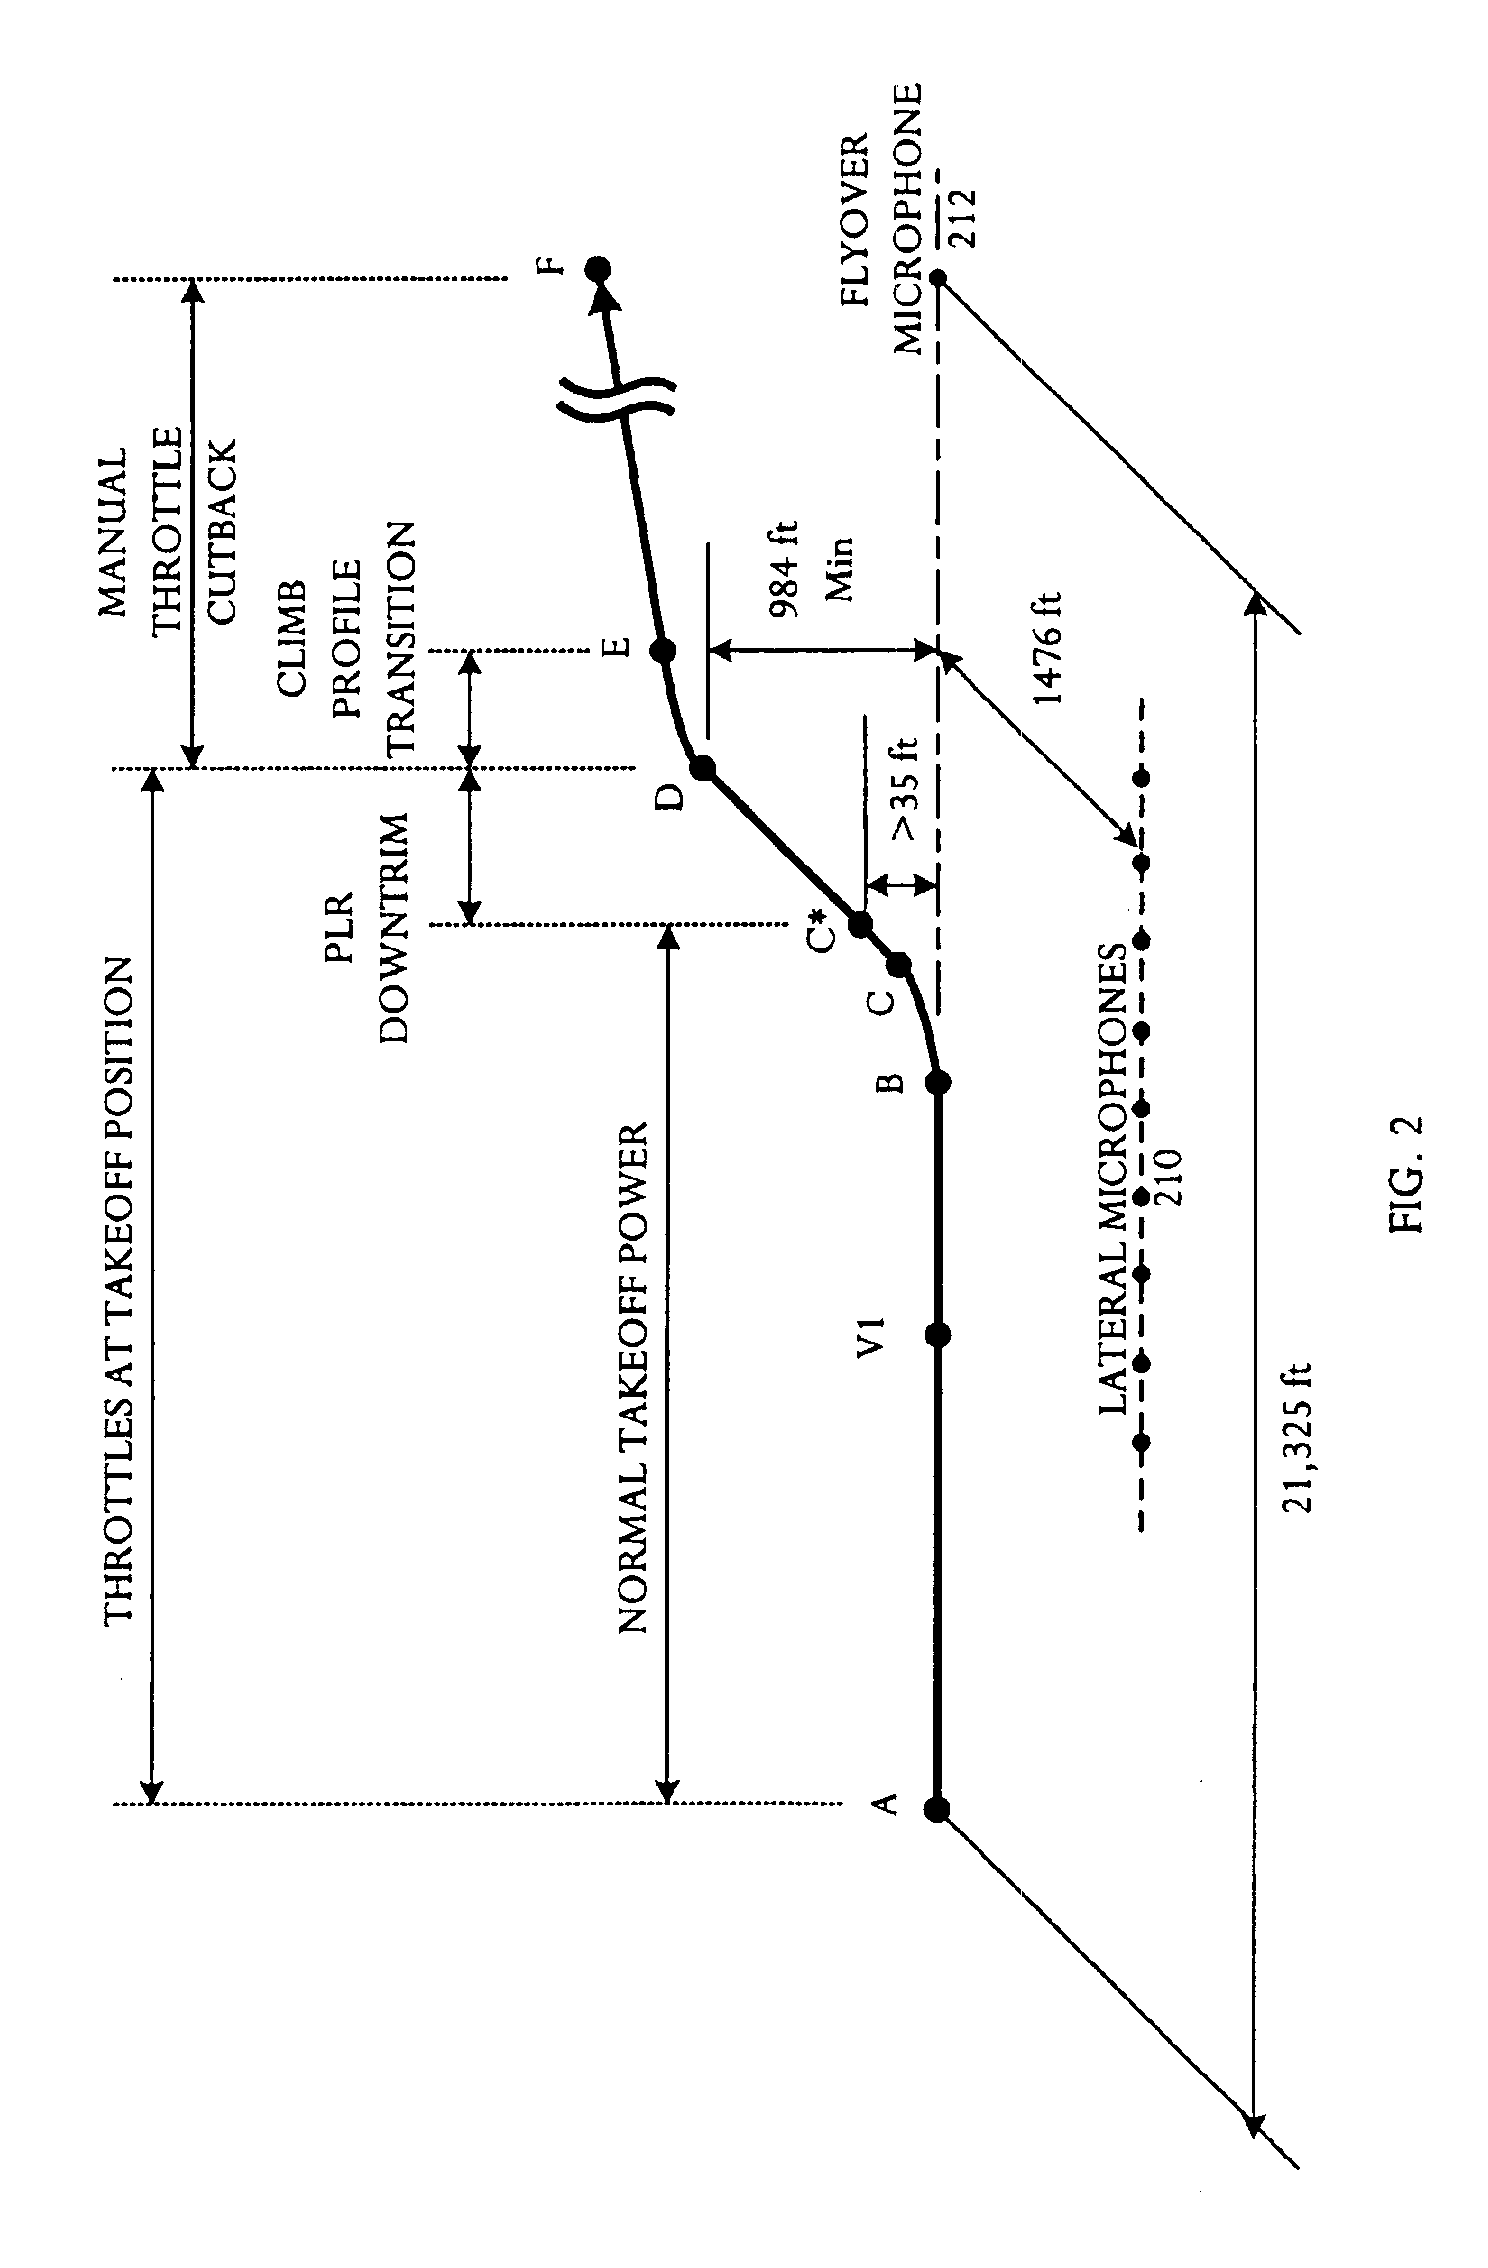 Automatic takeoff thrust management system